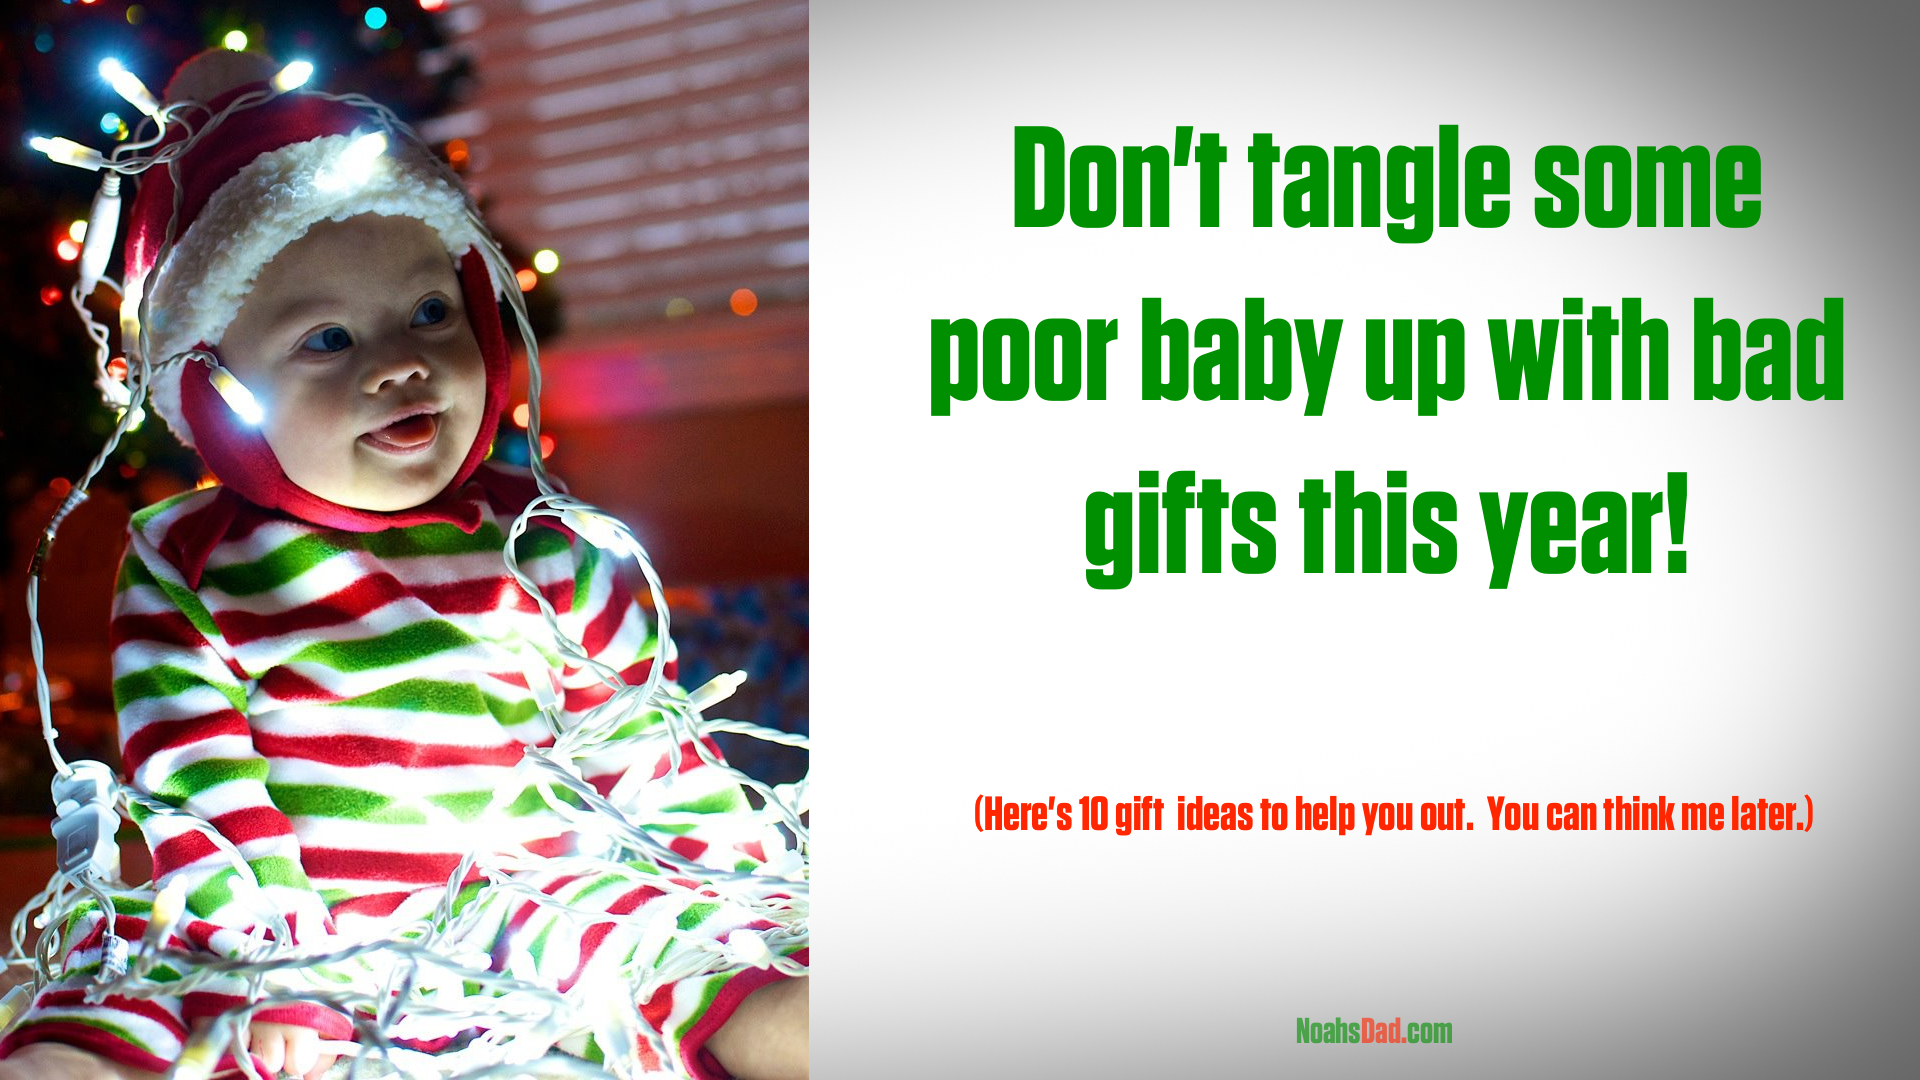 https://noahsdad.com/wp-content/uploads/2011/12/best-christmas-gift-ideas-down-syndrome-baby.png